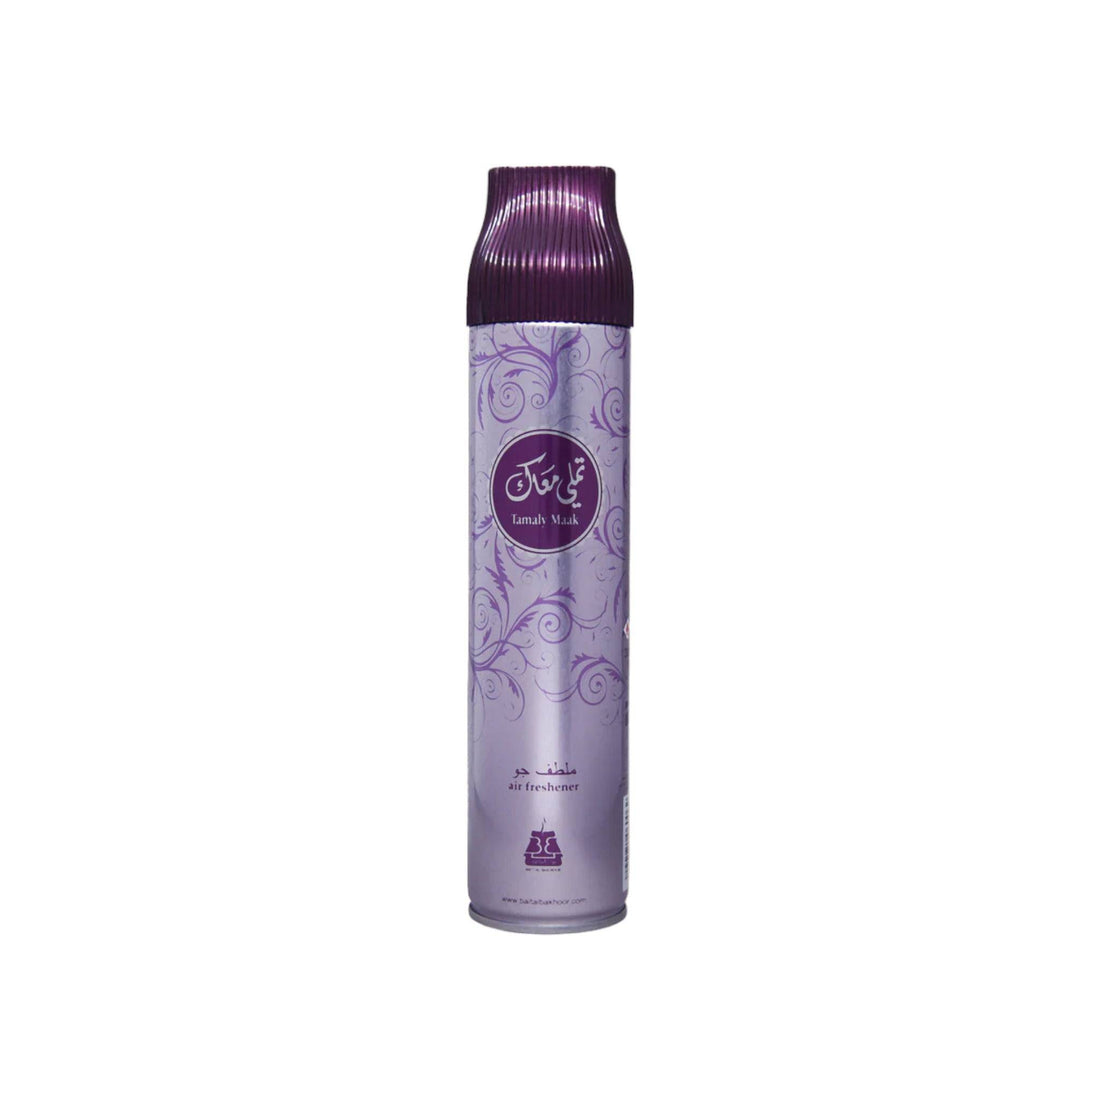 Elegant 300ml bottle of Bait Al Bakhoor Tamaly Maak Air Freshener, showcasing its ability to create a pleasant and aromatic environment.